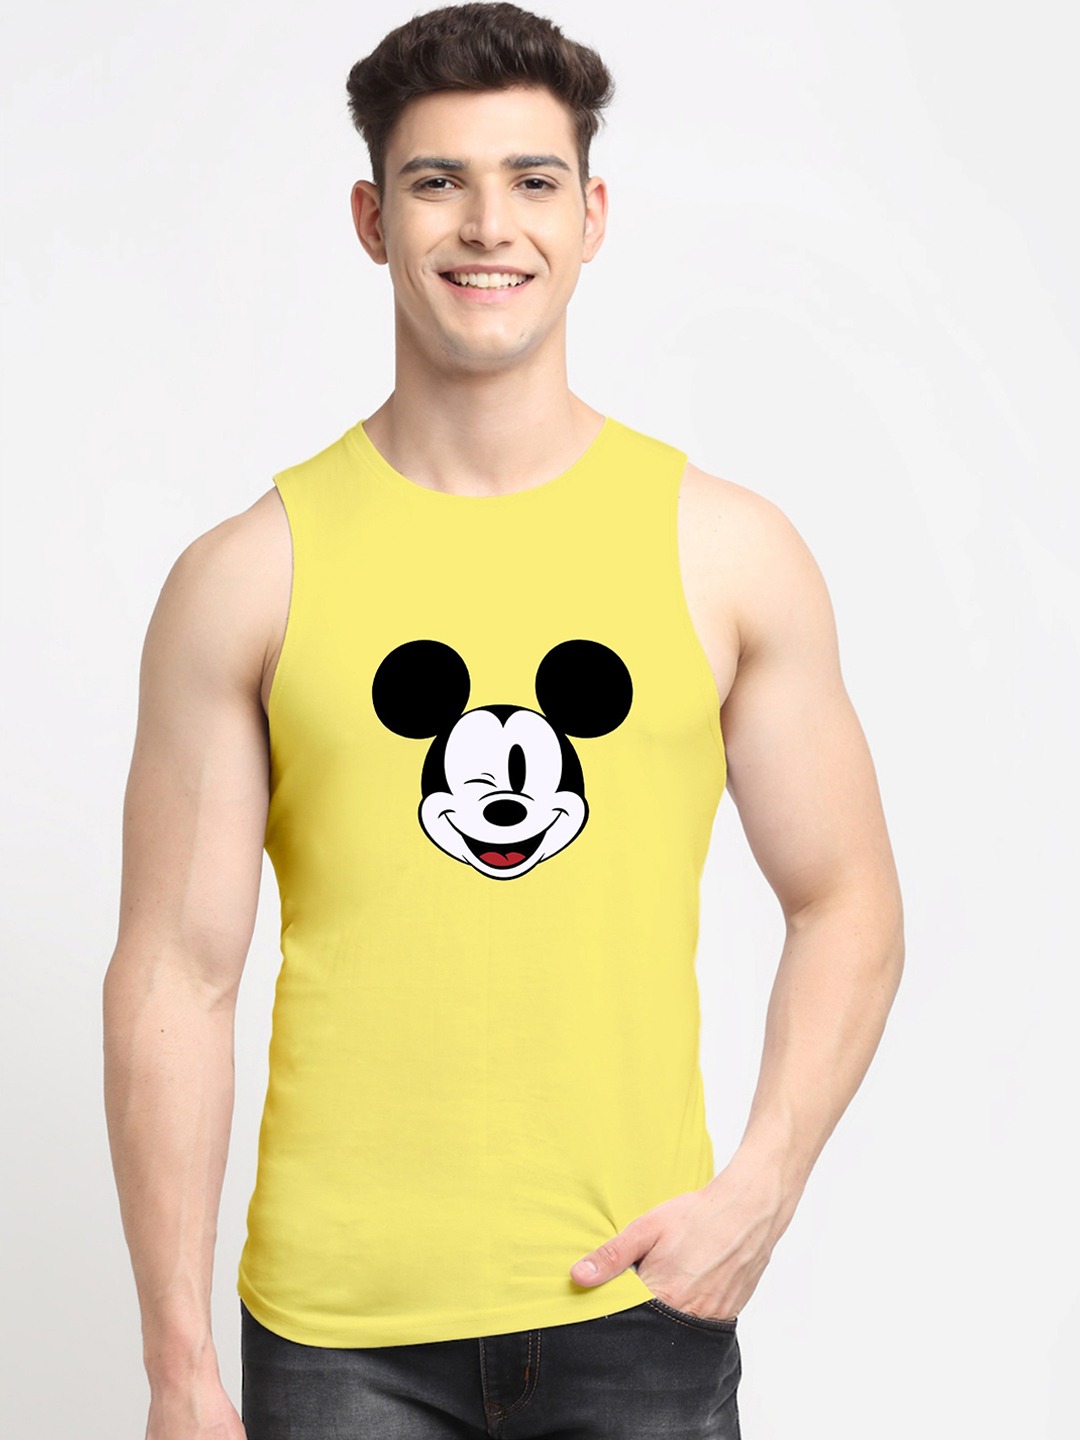 Clothing Innerwear Vests | Friskers Men Yellow Micky Mouse Printed Outerwear Vest - QH53940